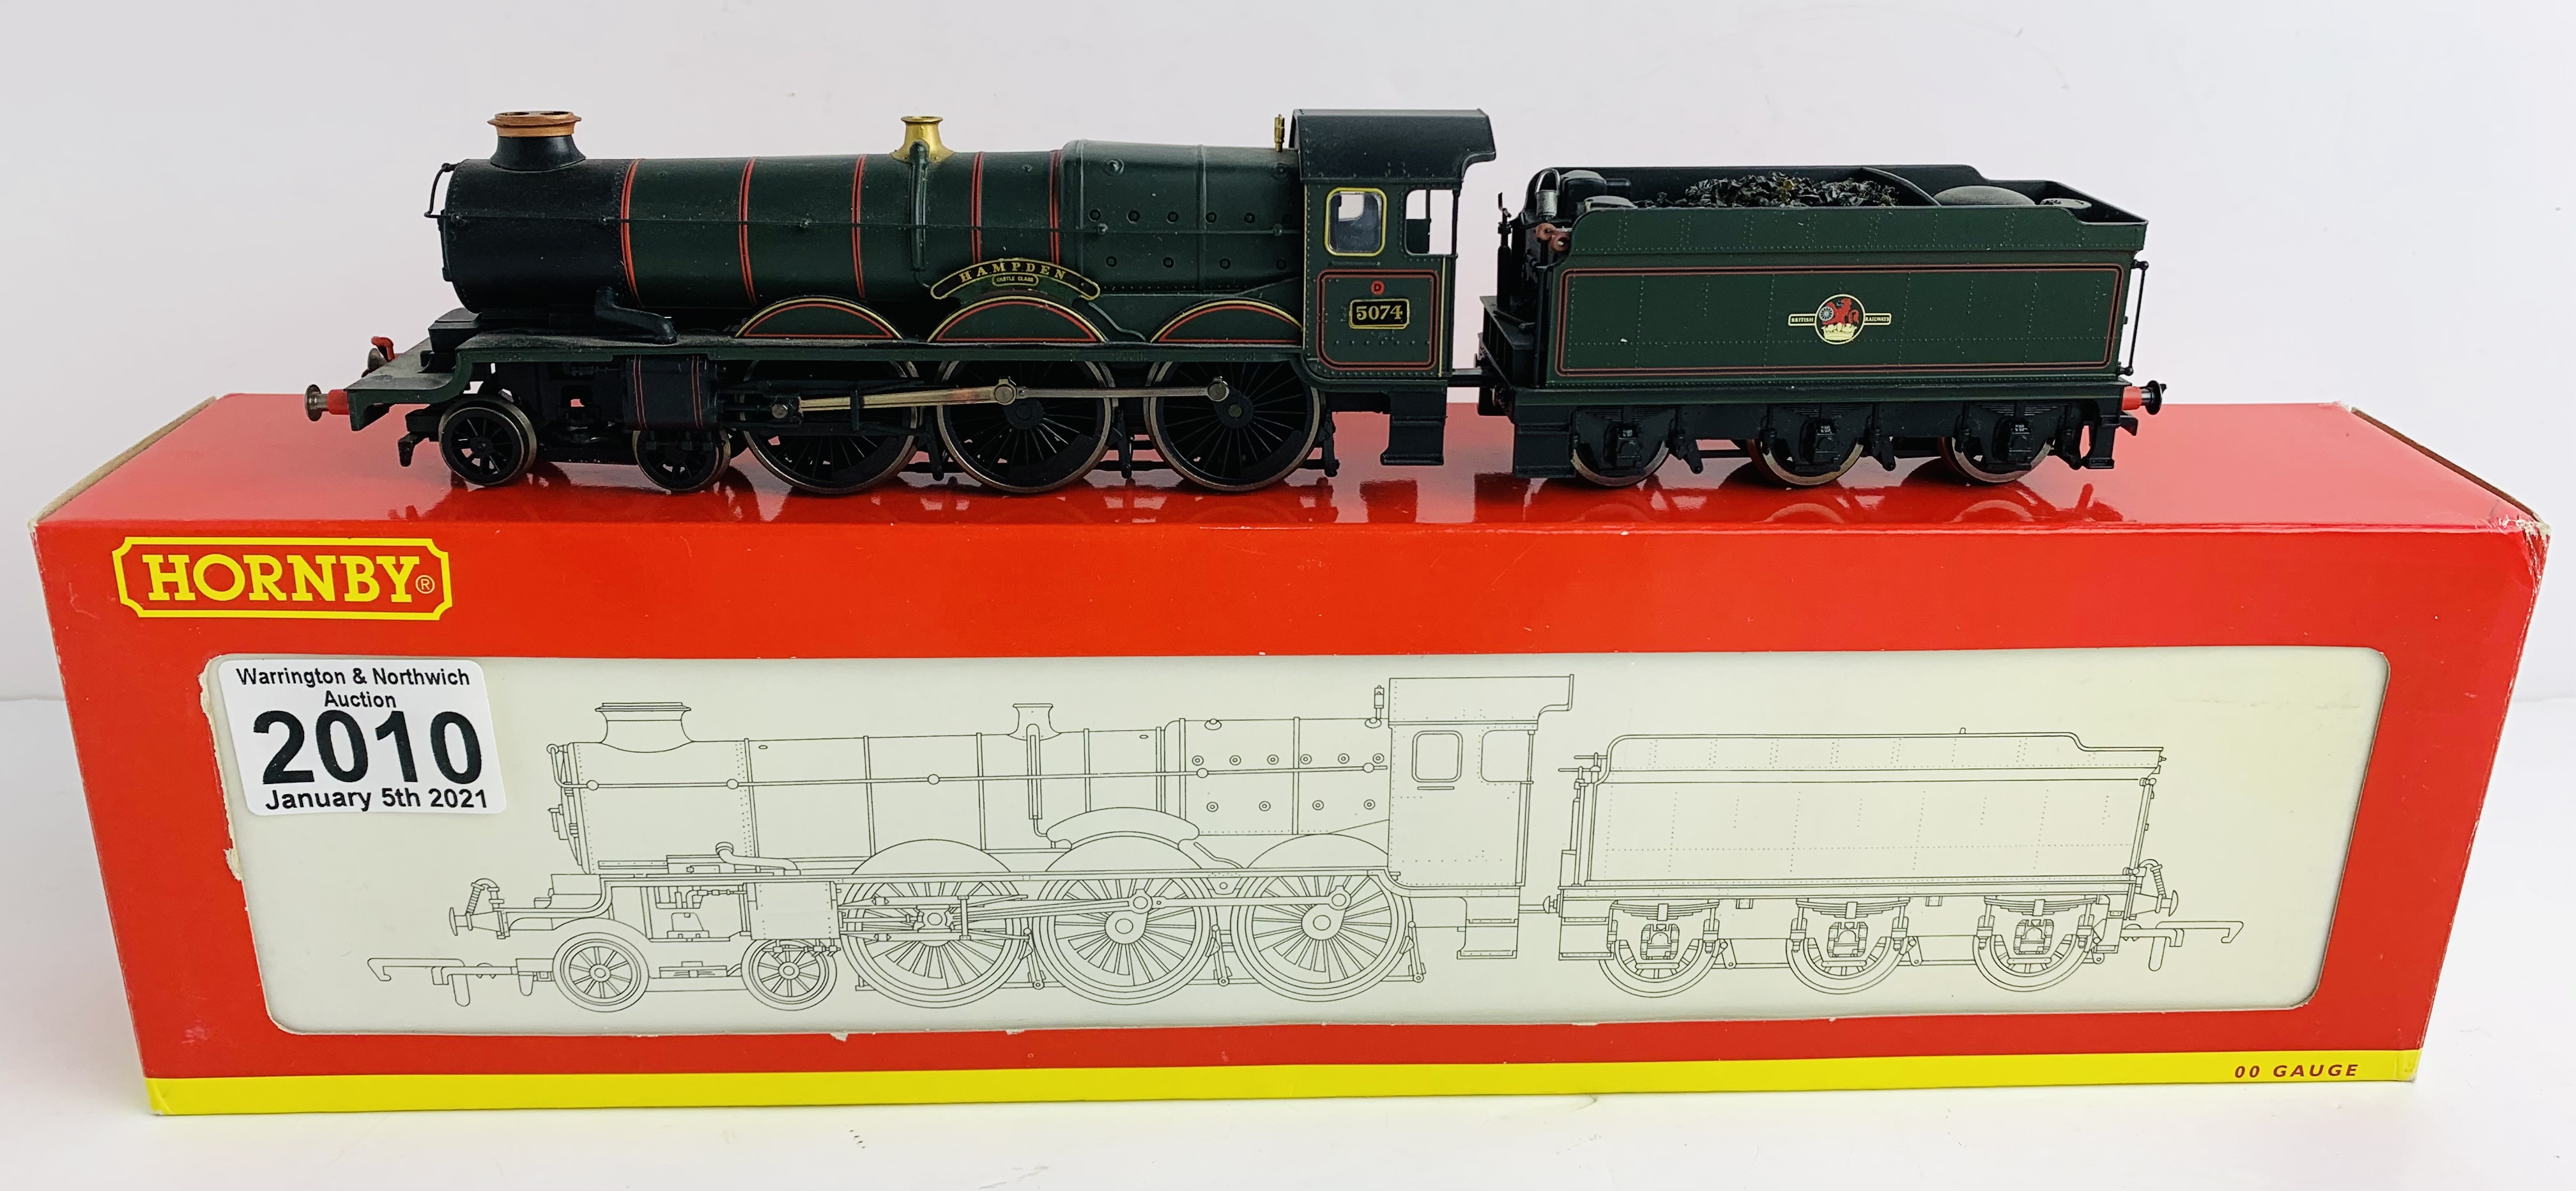 Hornby OO Gauge Hampden Castle Locomotive Boxed P&P Group 1 (£14+VAT for the first lot and £1+VAT